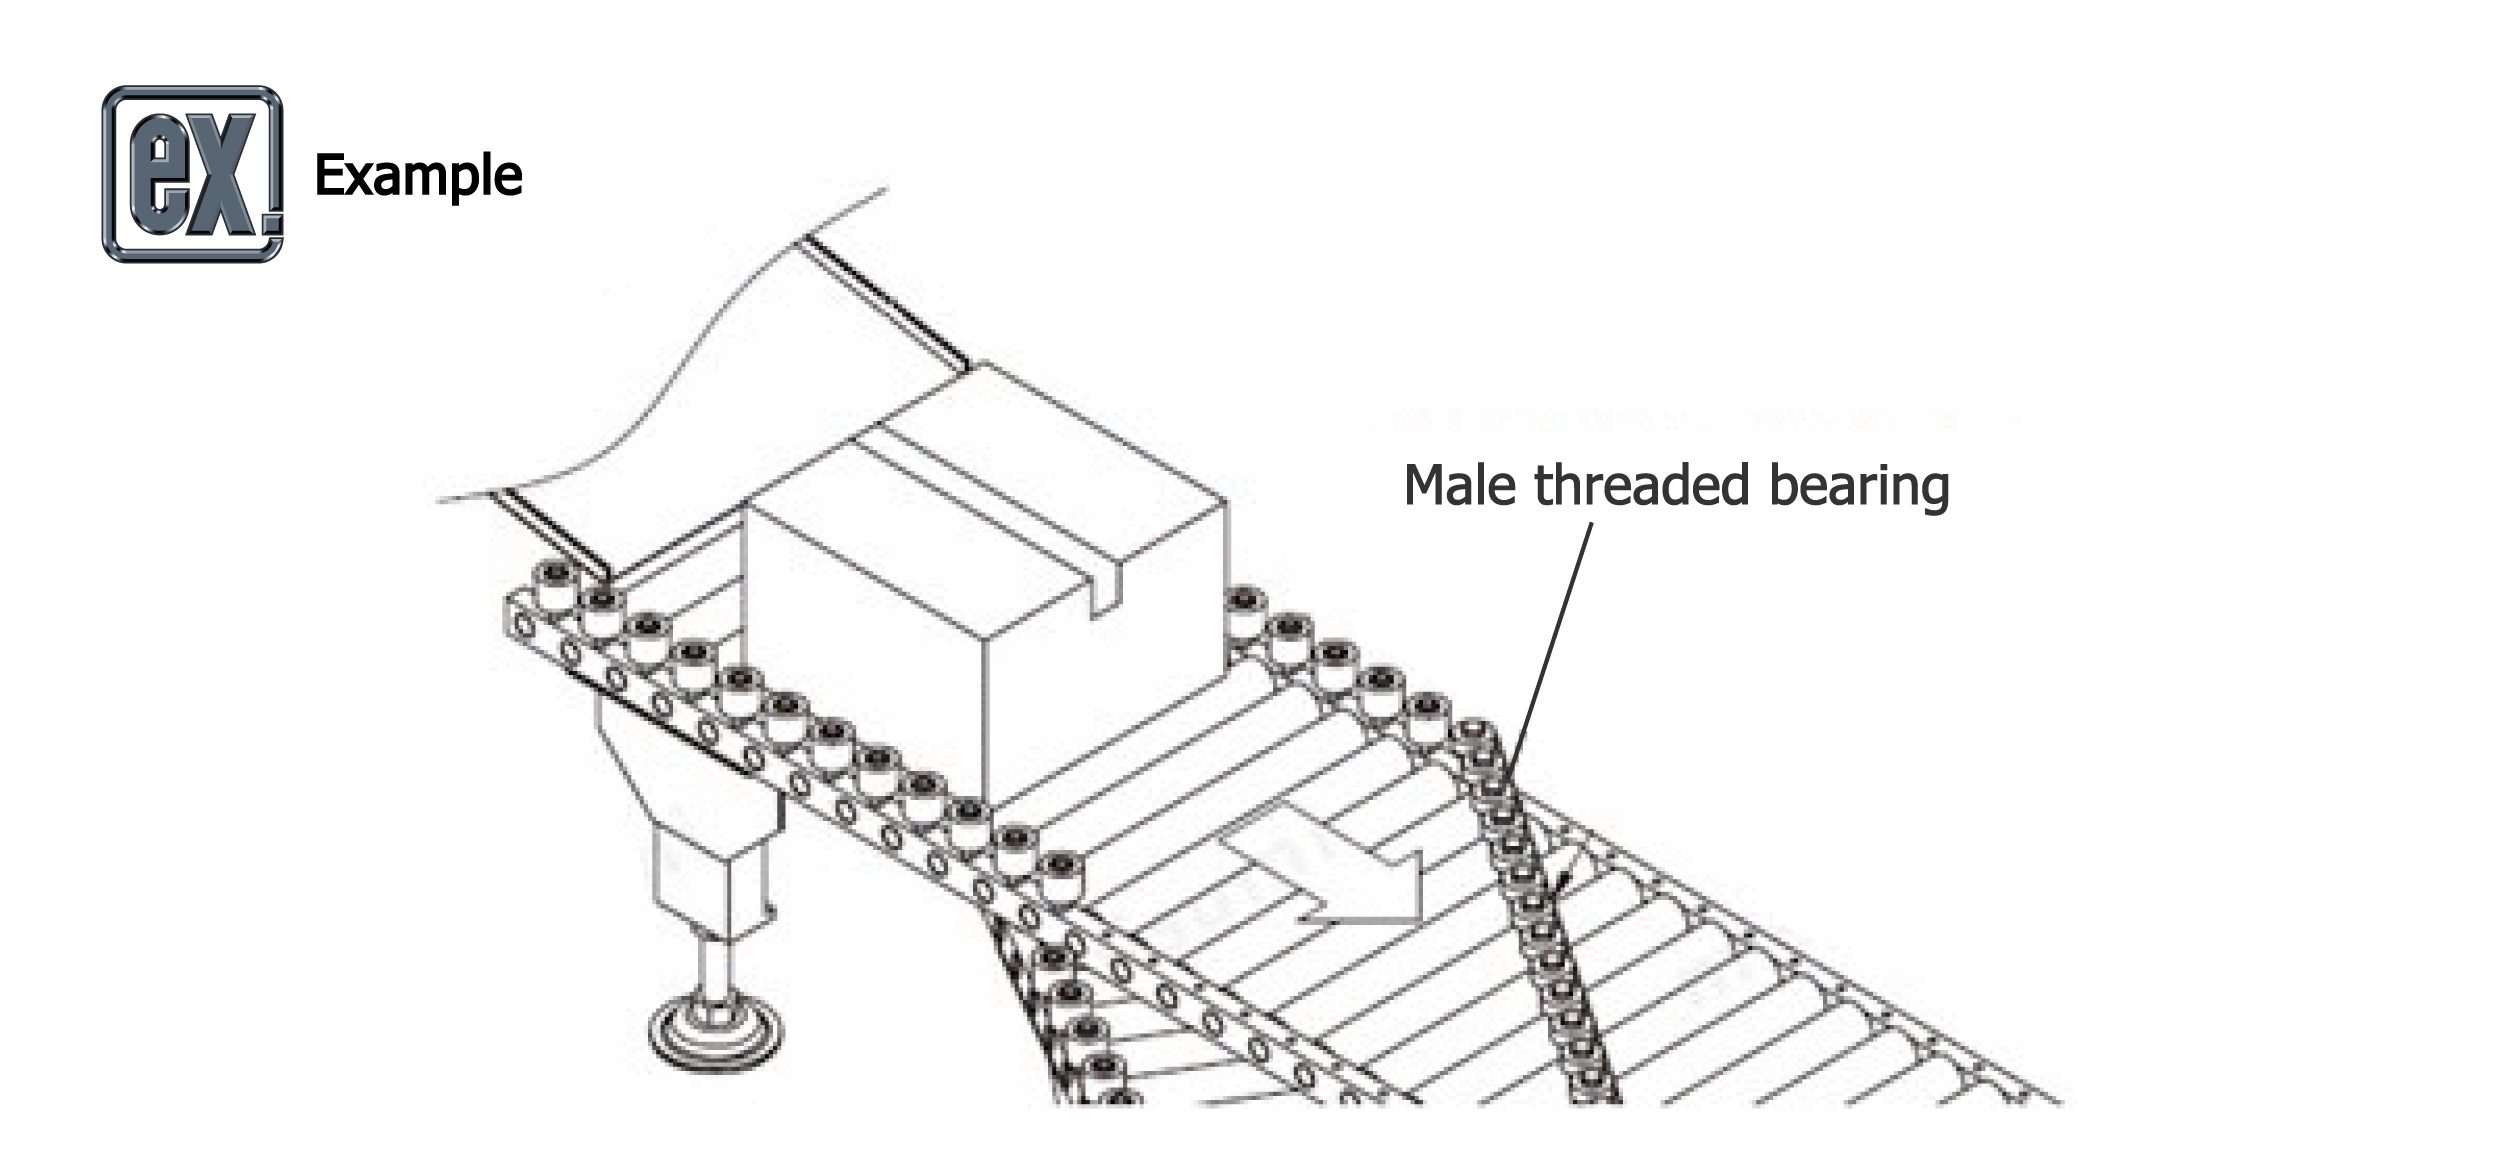 Male threaded bearing usage example 1_How to use